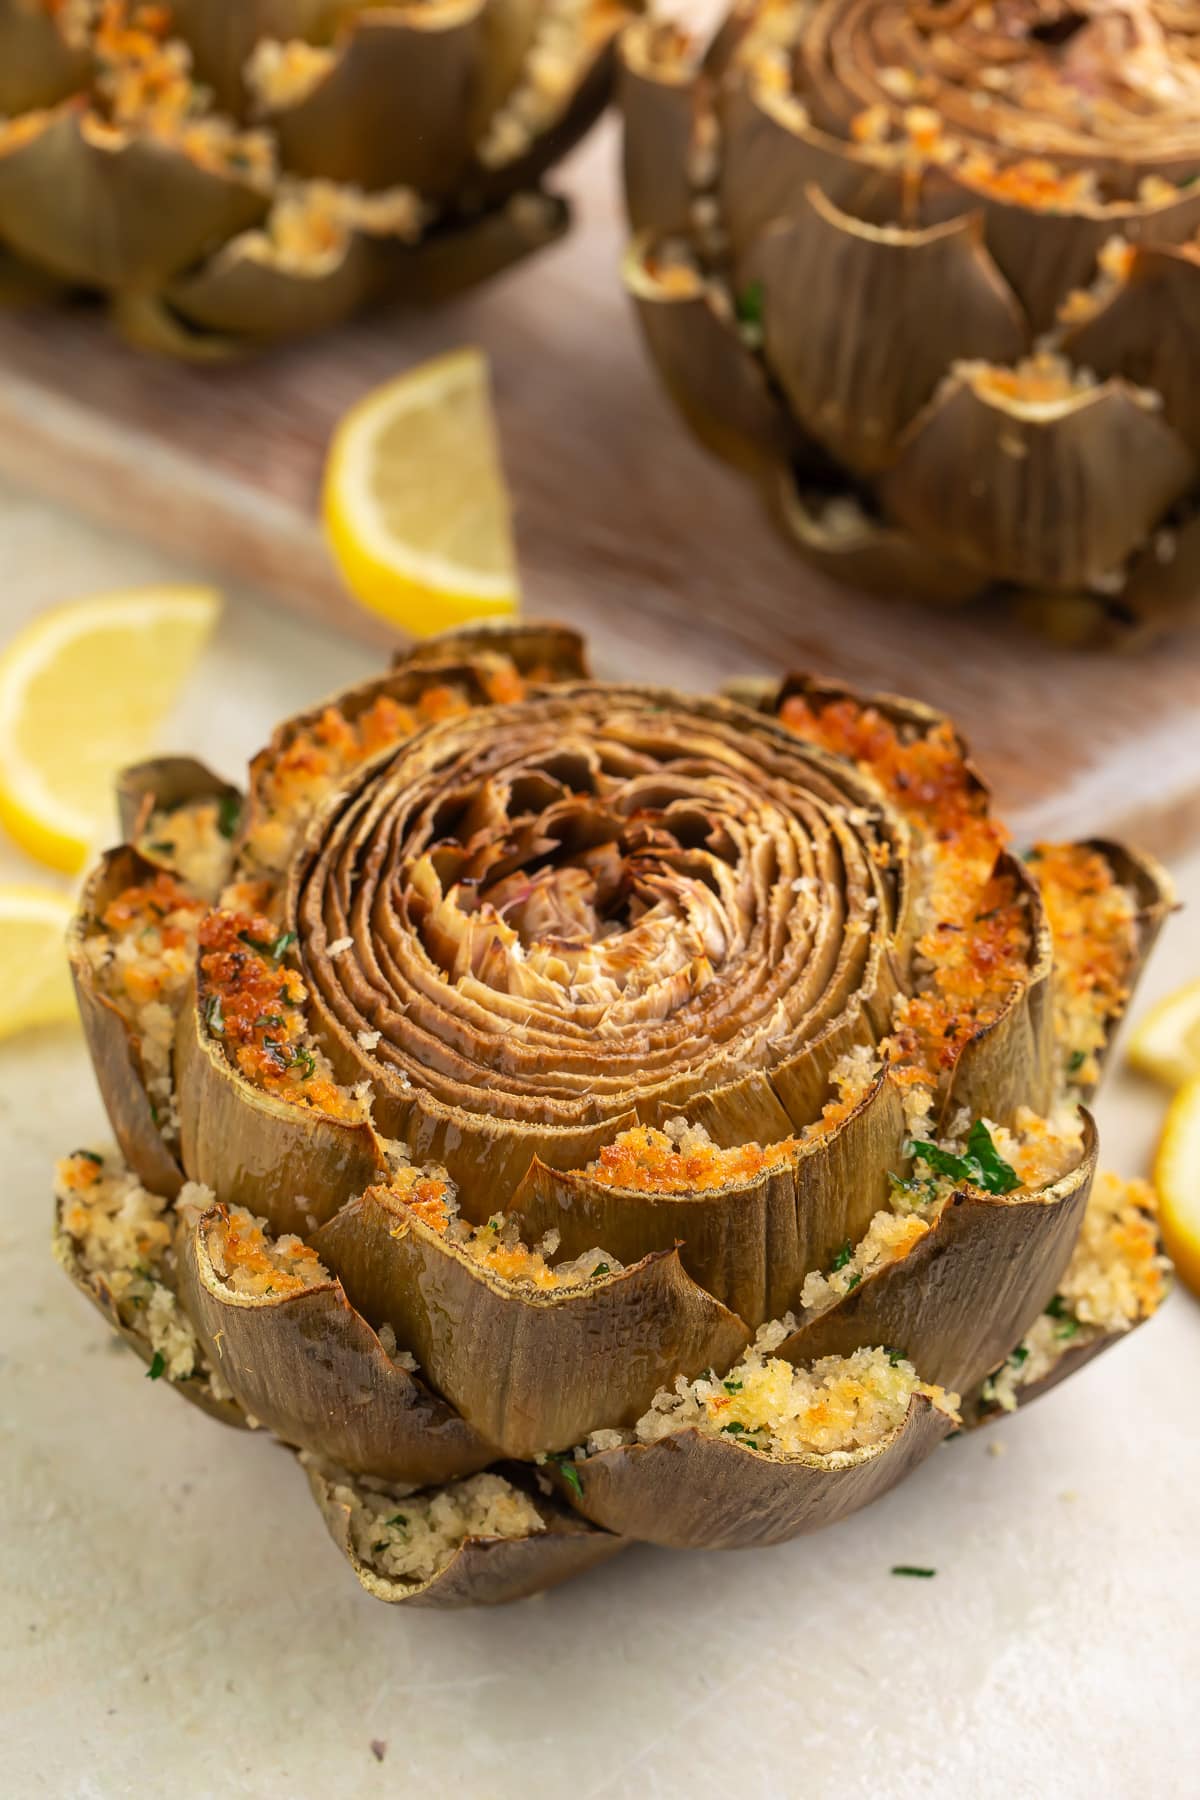 Green steamed artichokes stuffed with a baked cheese and breadcrumb mixture between each petal.